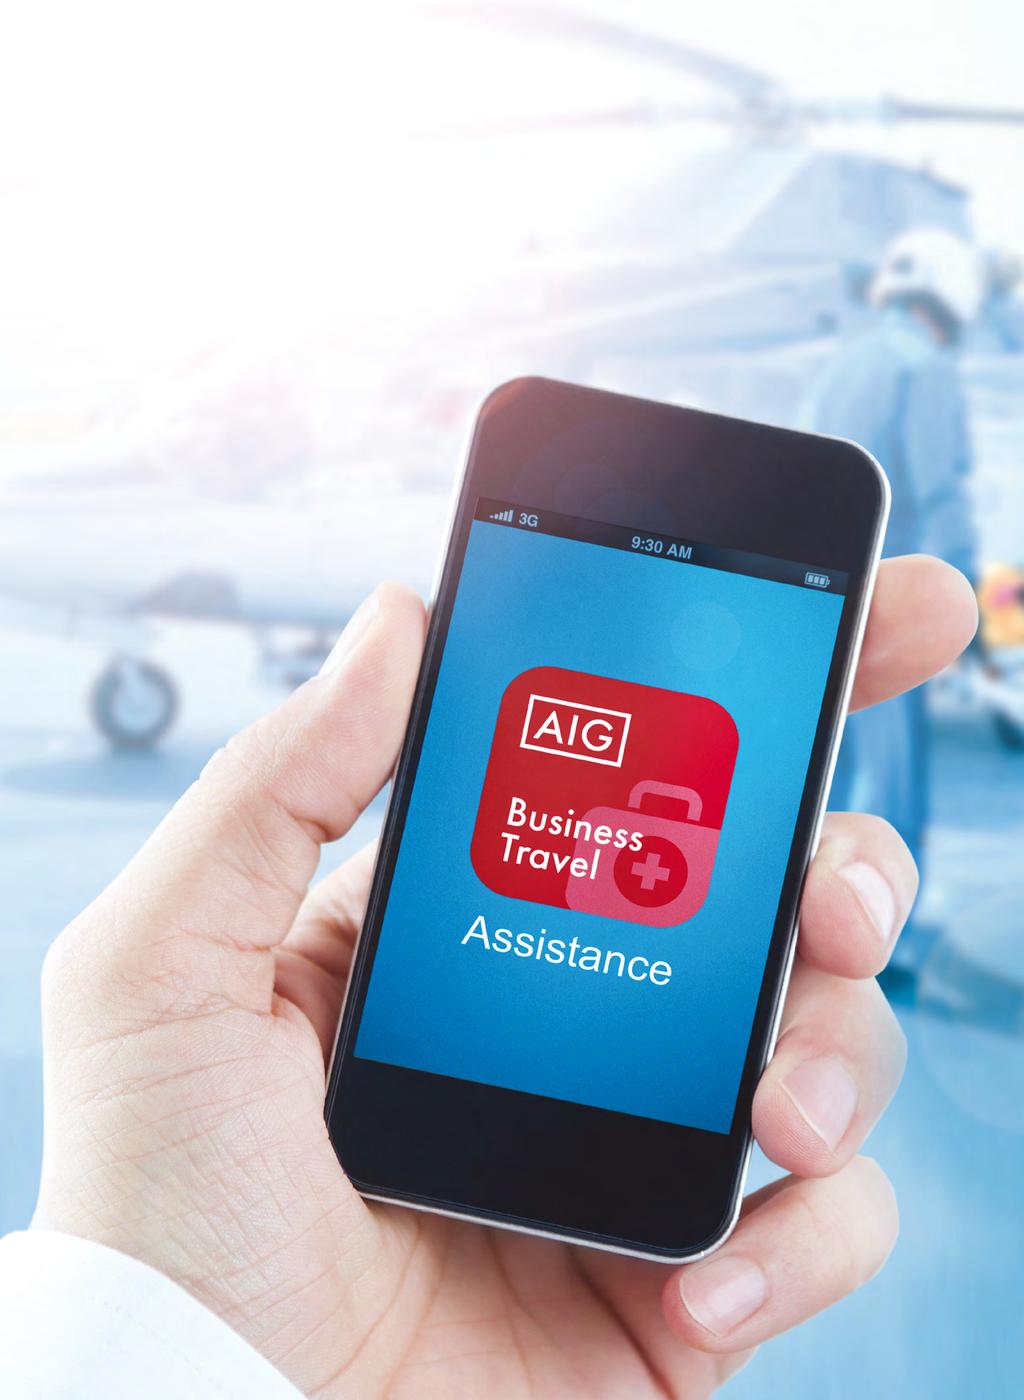 Broad coverage combined with market leading mobile technology. Our Business Travel Accident plan provides employees with a full range of insurance coverage and traveler assistance.